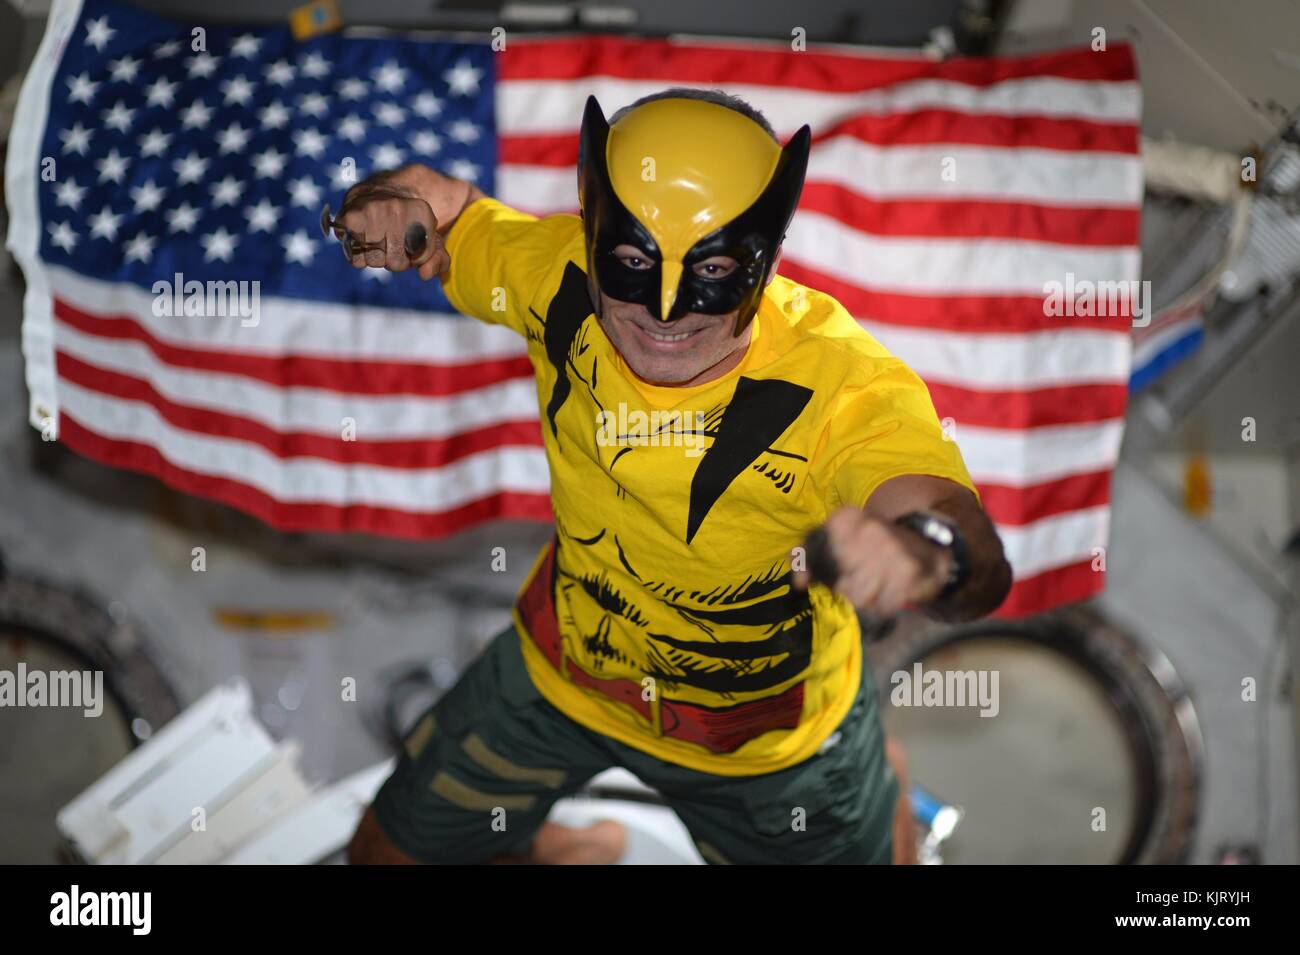 NASA Expedition 53 prime crew member American astronaut Mark Vande Hei  wears a Wolverine costume while celebrating Halloween aboard the  International Space Station October 31, 2017 in Earth orbit. (photo by NASA